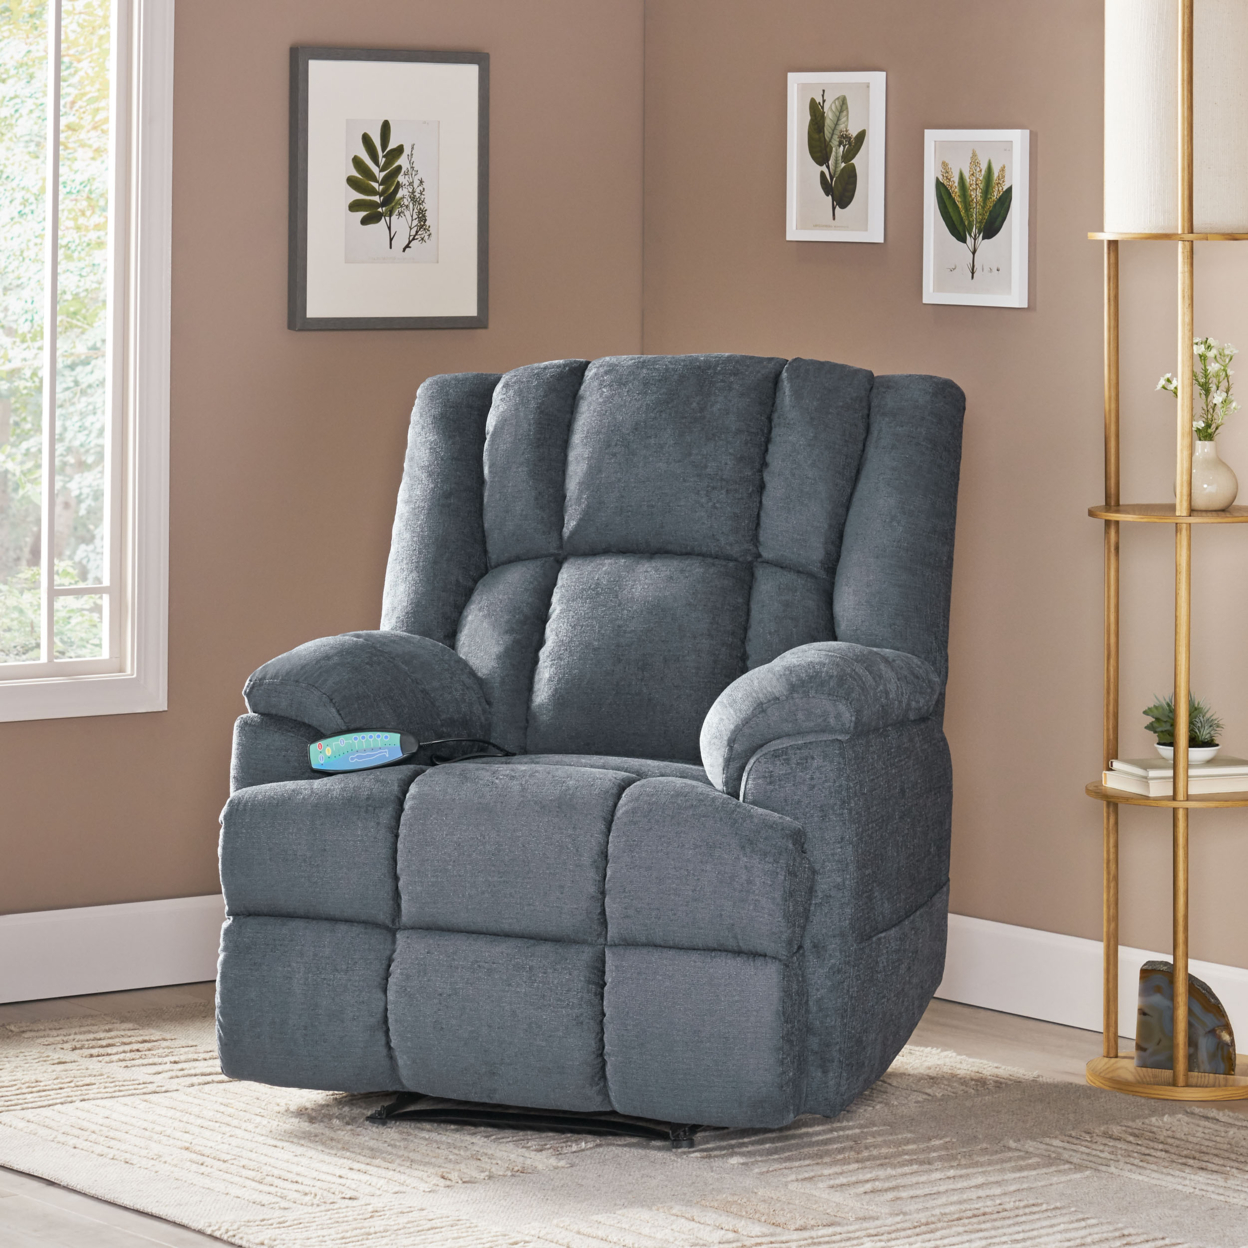 Siloam Contemporary Pillow Tufted Massage Recliner - Black/charcoal